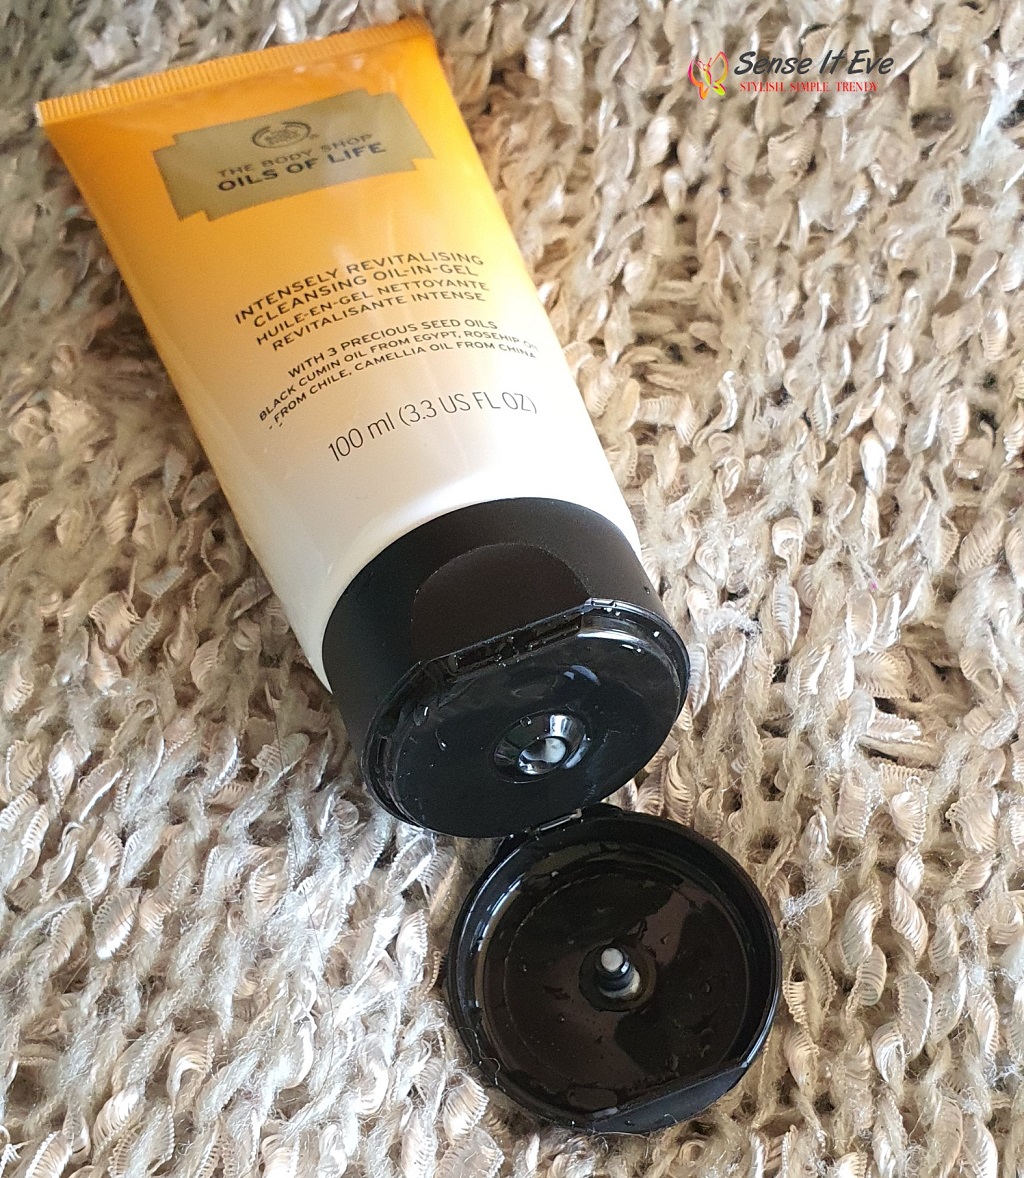 The Body Shop Oils of Life™ Intensely Revitalizing Cleansing Oil In Gel Packaging Sense It Eve The Body Shop Oils of Life Intensely Revitalizing Cleansing Oil-In-Gel Review